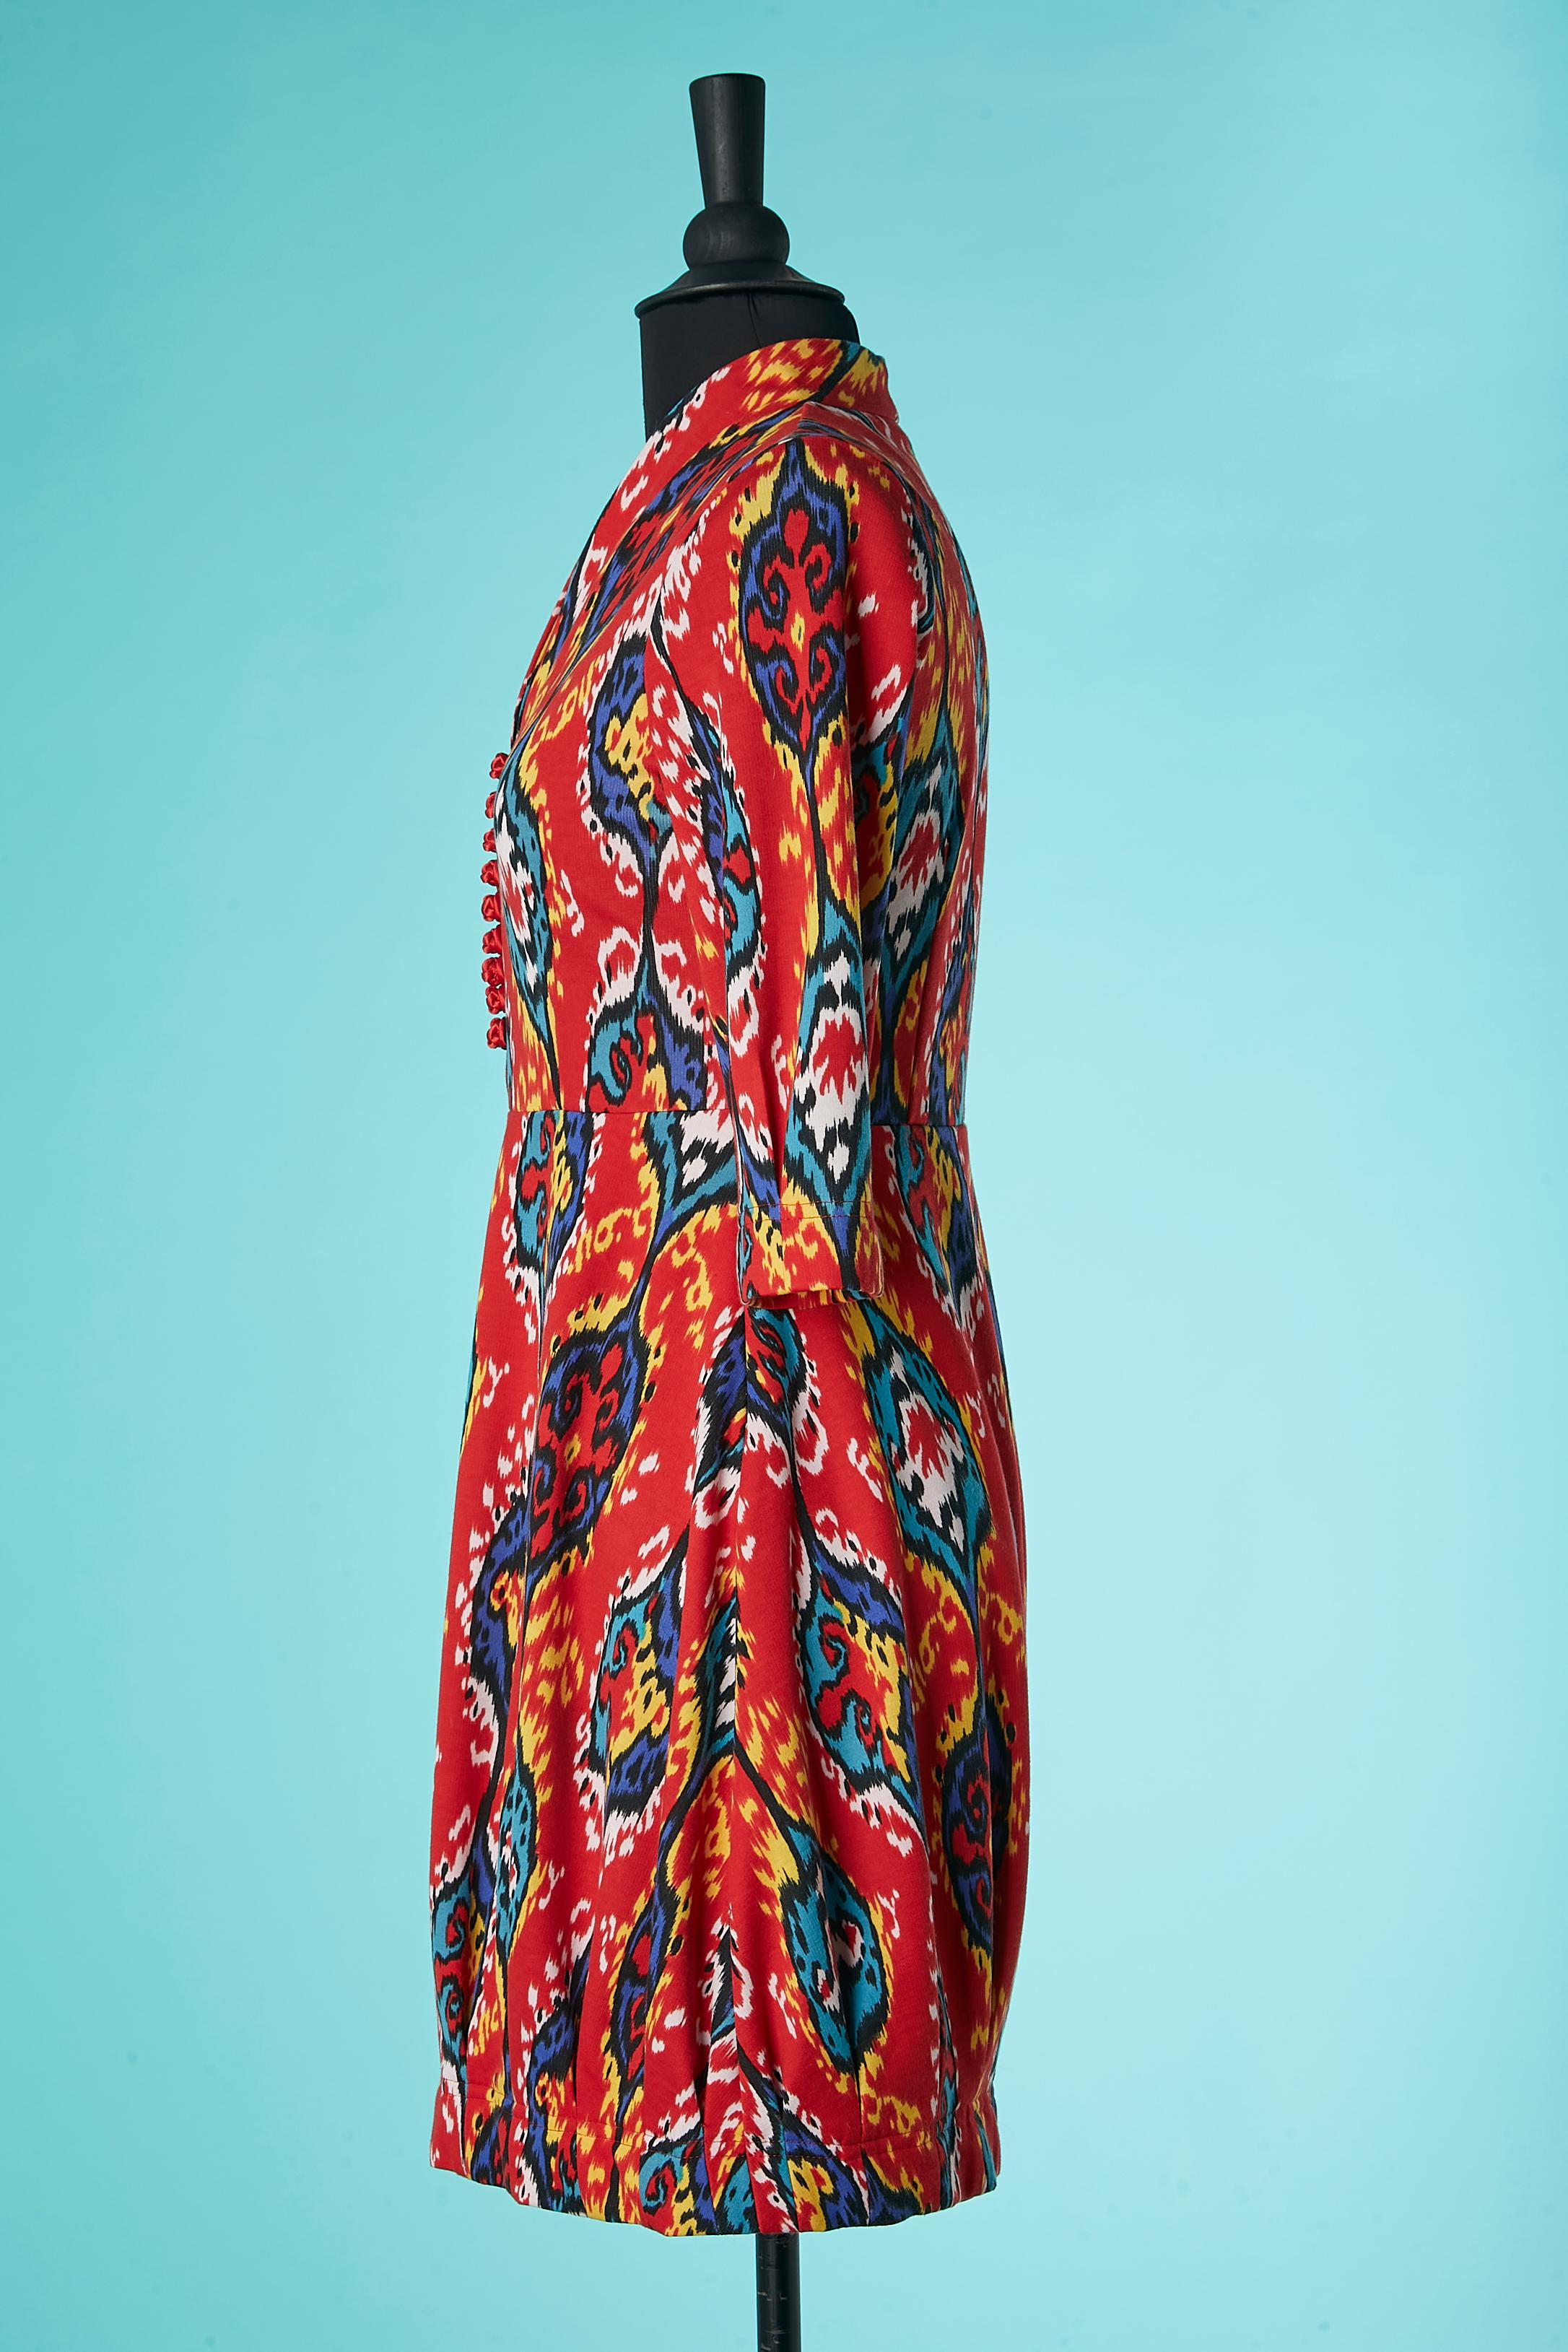 Women's Cocktail dress with Ikat inspiration print on Christian Dior Boutique Circa 1980 For Sale